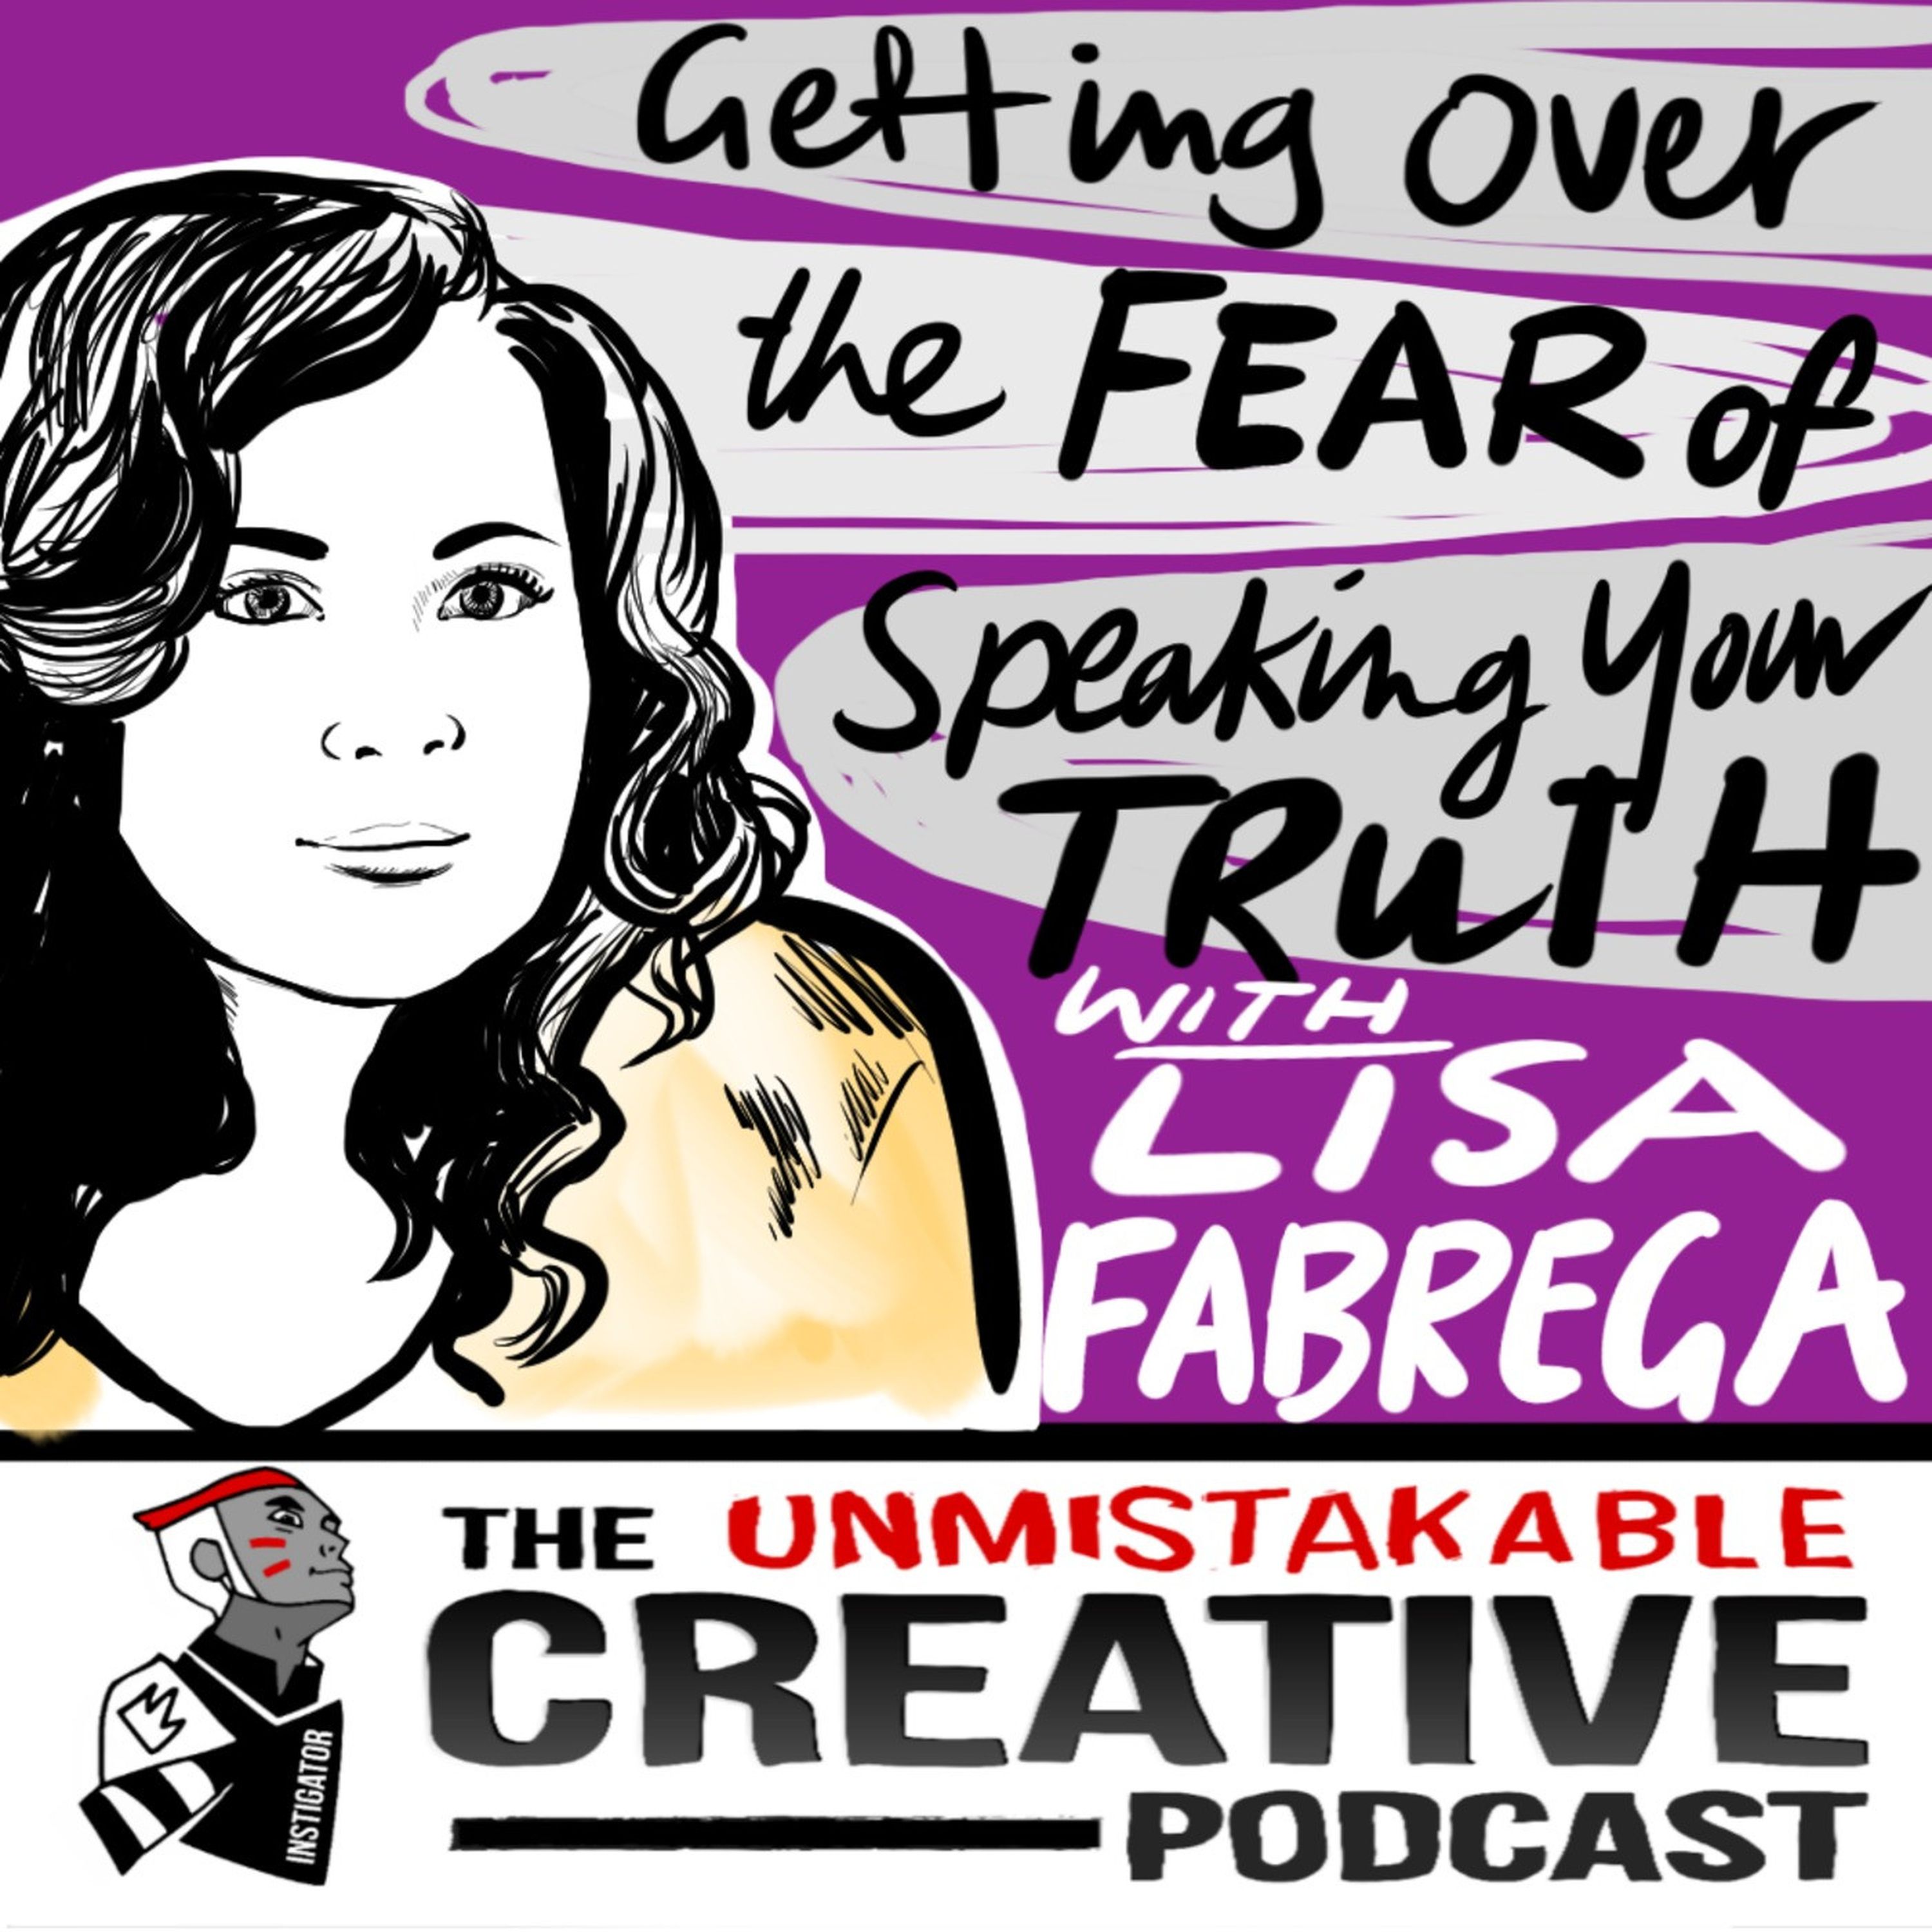 Getting Over the Fear of Speaking Your Truth with Lisa Fabrega Image